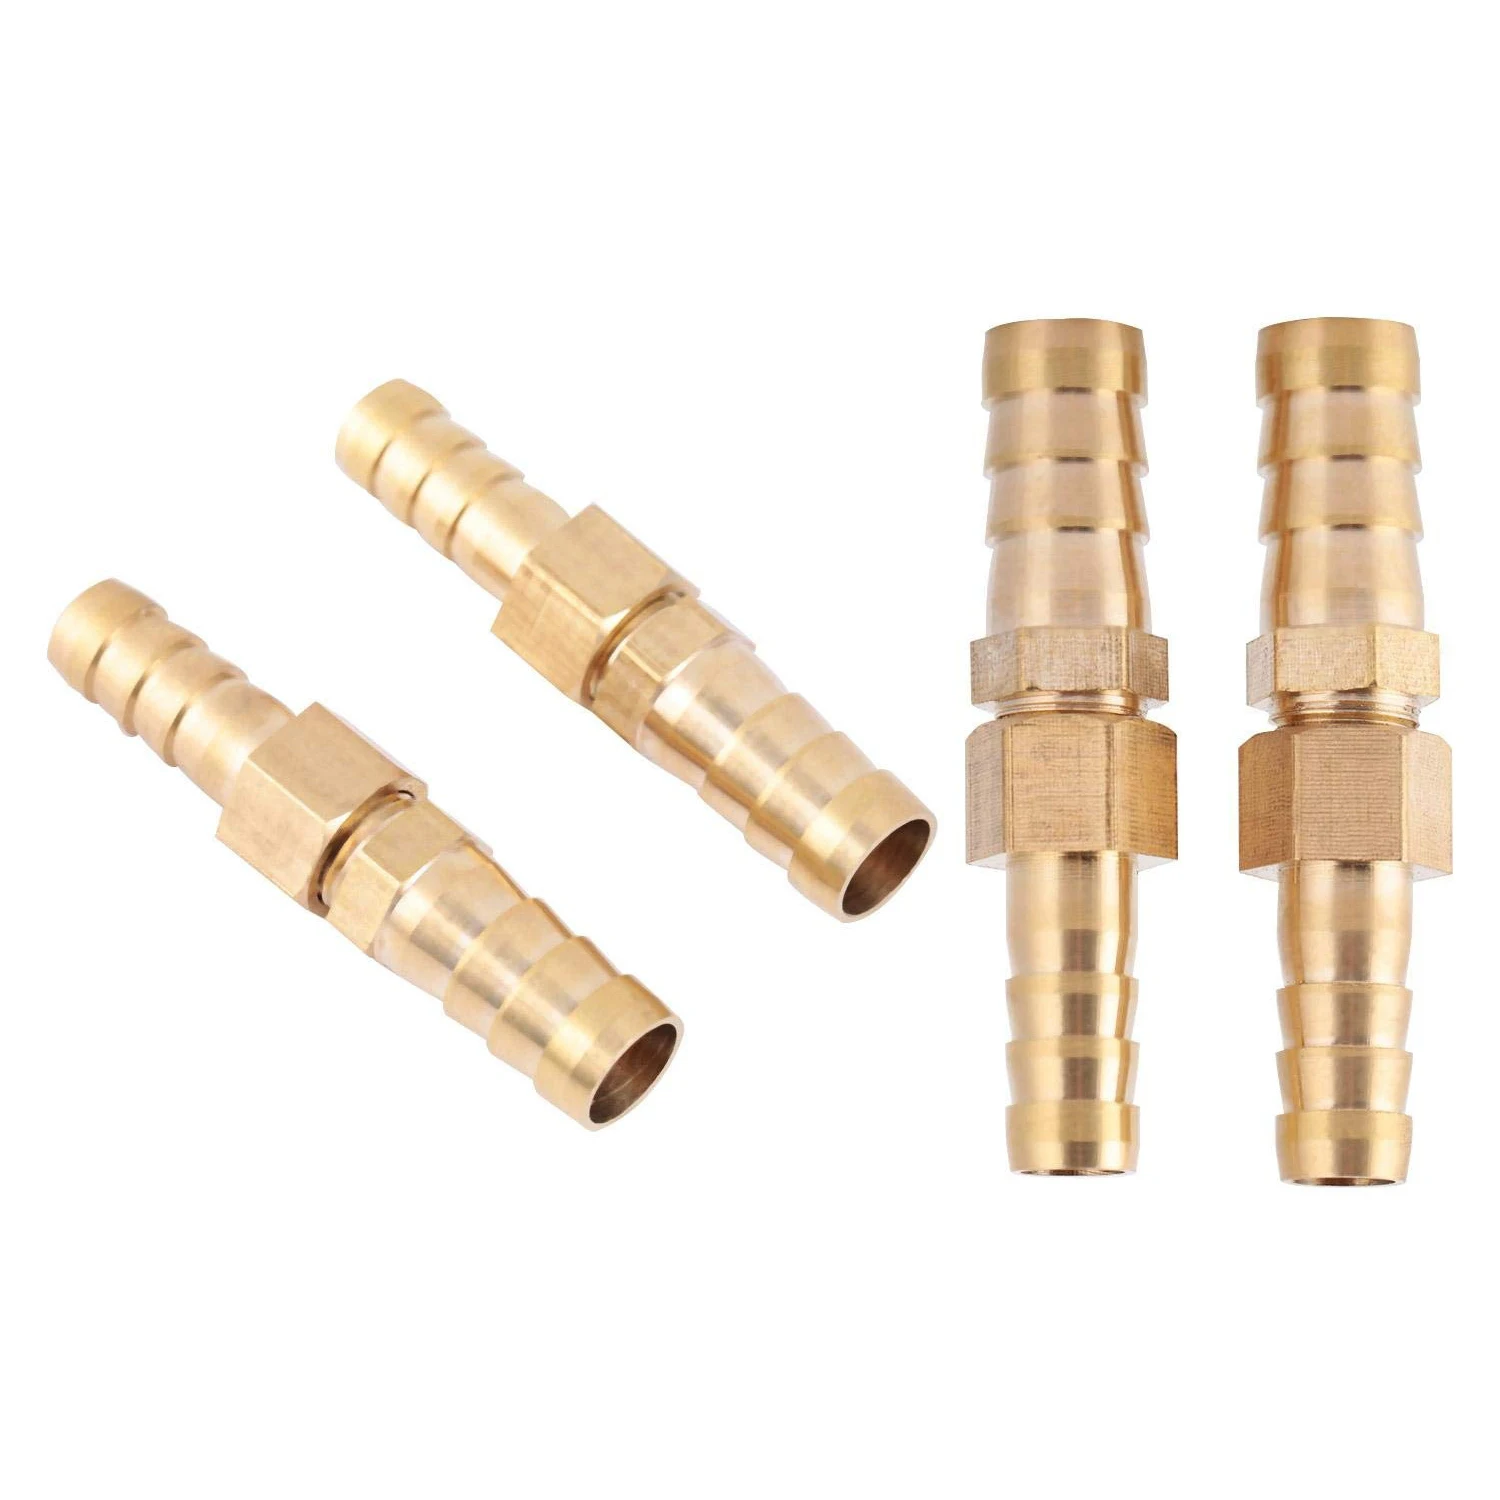 

2 Copper Two-Way Pagoda In-Line Quick Conversion Joints, Variable Diameter Water Pipe Joints And Hoses